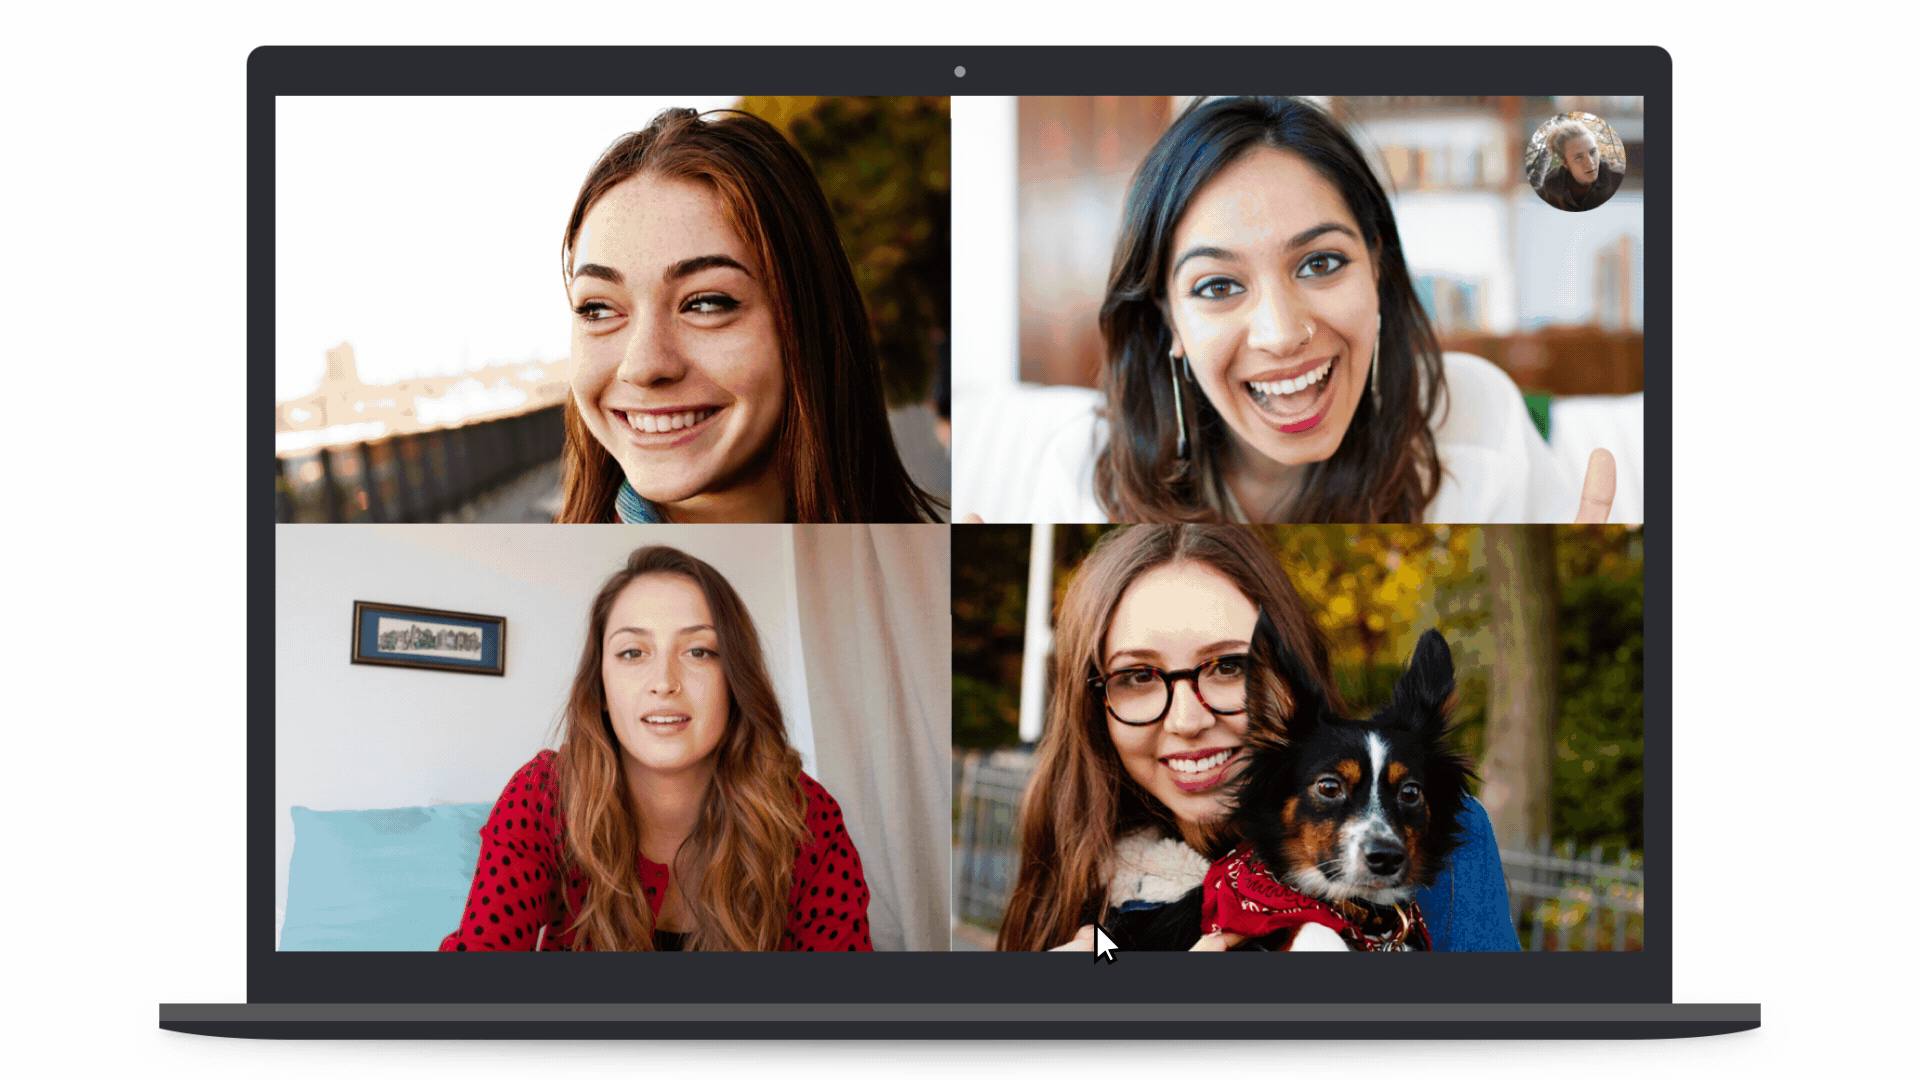 GIF shows 4 women on a Skype call, with one woman blurring her background by clicking on the camera icon and toggling that action